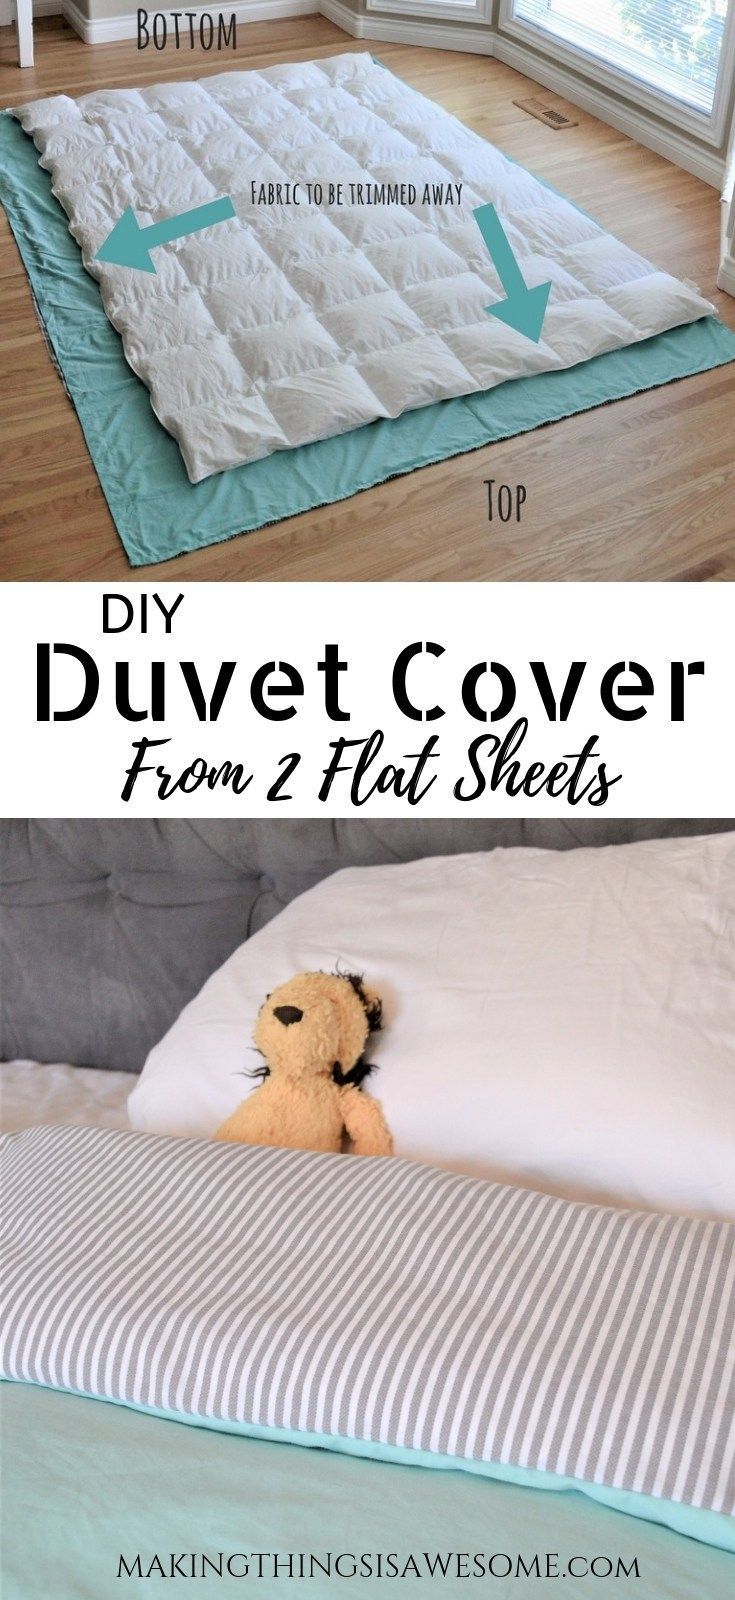 DIY Duvet Cover From Flat Sheets! - Tutorial! - Making Things is Awesome -   18 diy projects Sewing awesome ideas